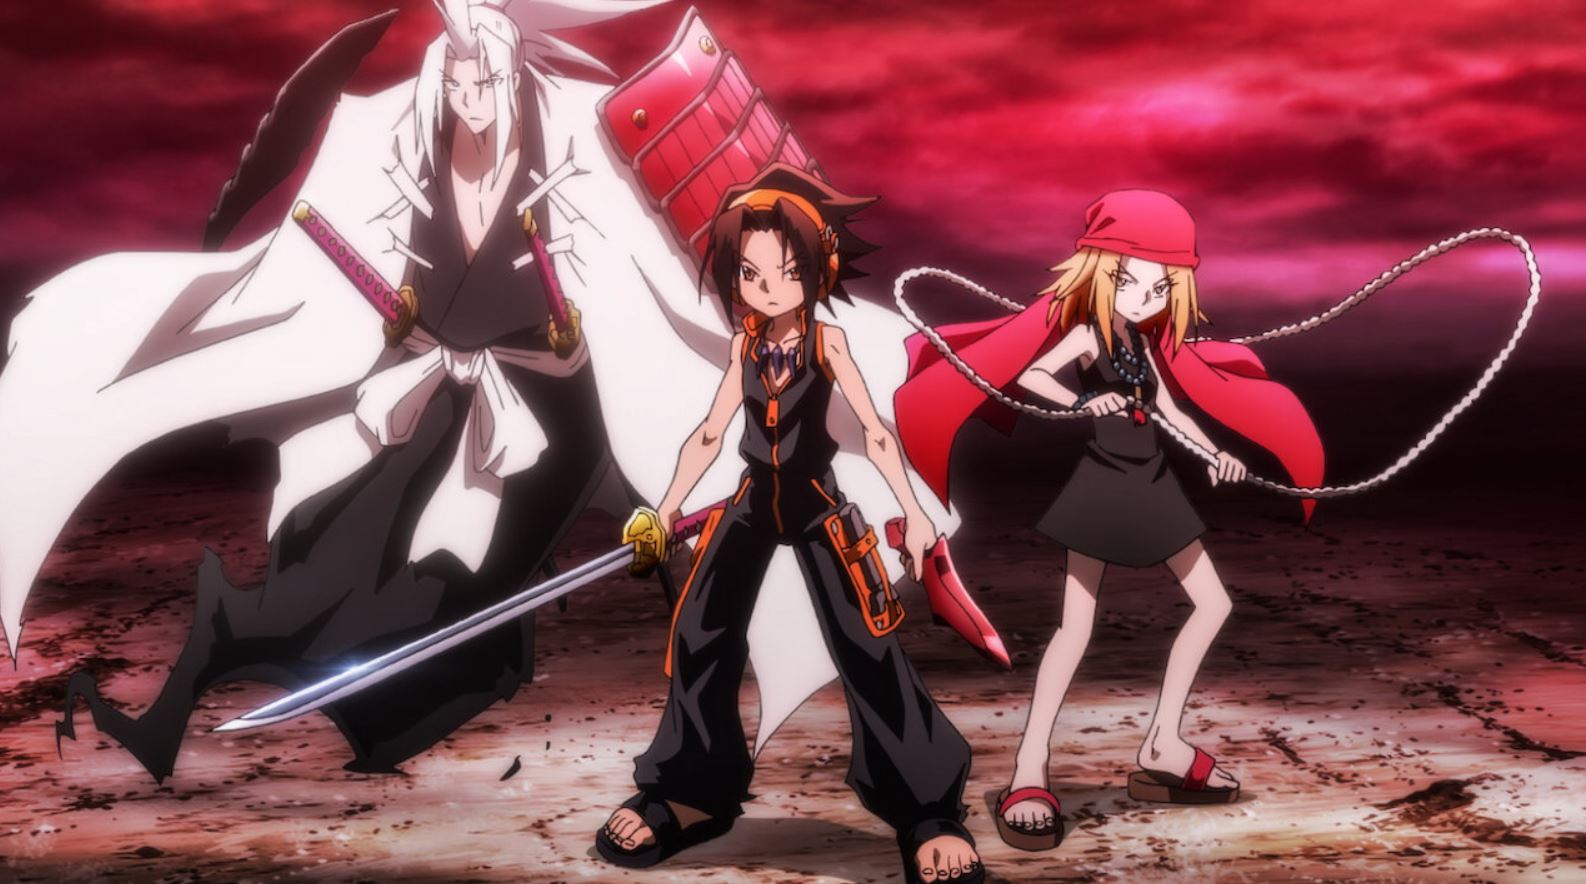 Shaman King Season 2 on Netflix: All Volume Release Dates are Here - Will Shaman King Have A Season 2